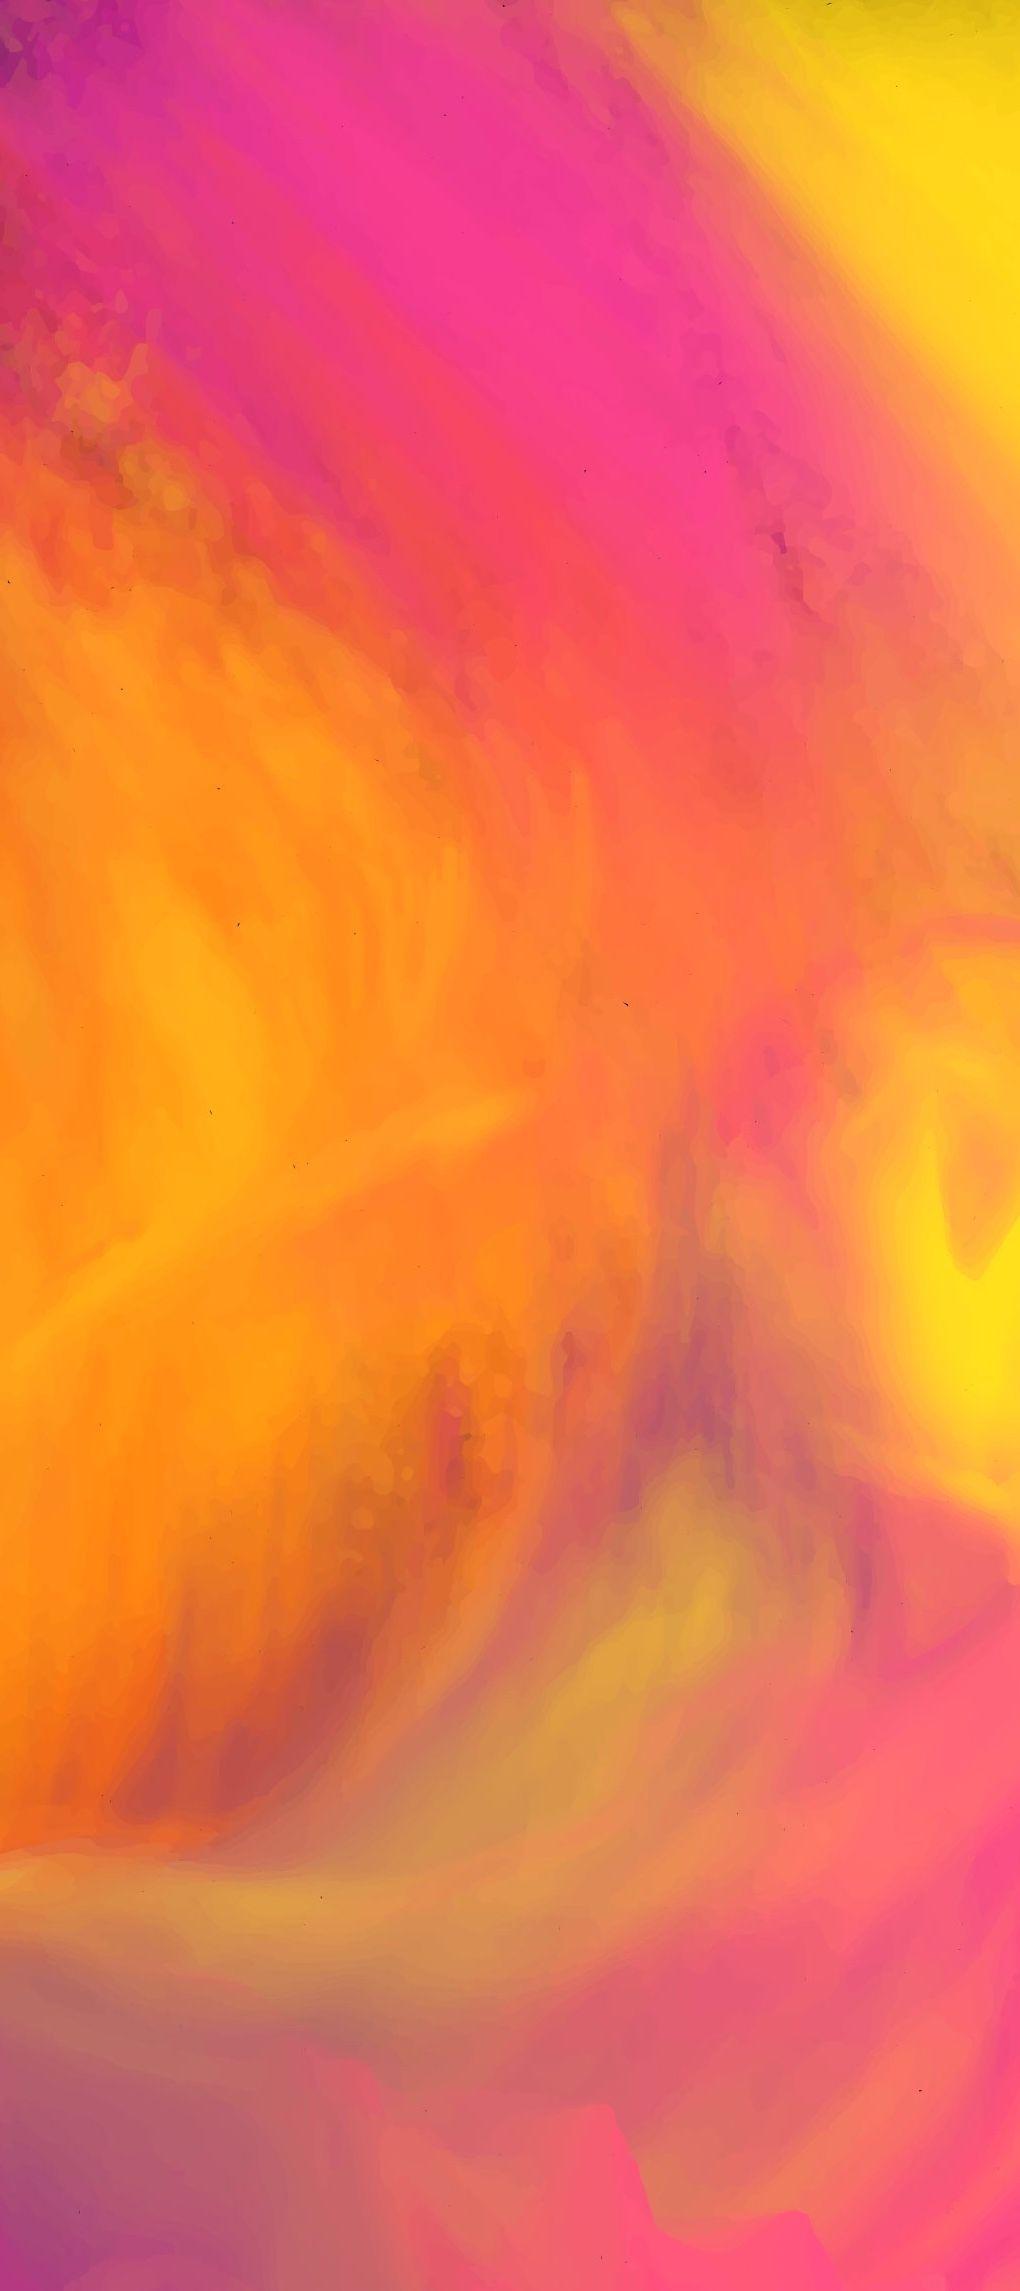 iPhone Wallpaper. Orange, Yellow, Red, Acrylic paint, Pink